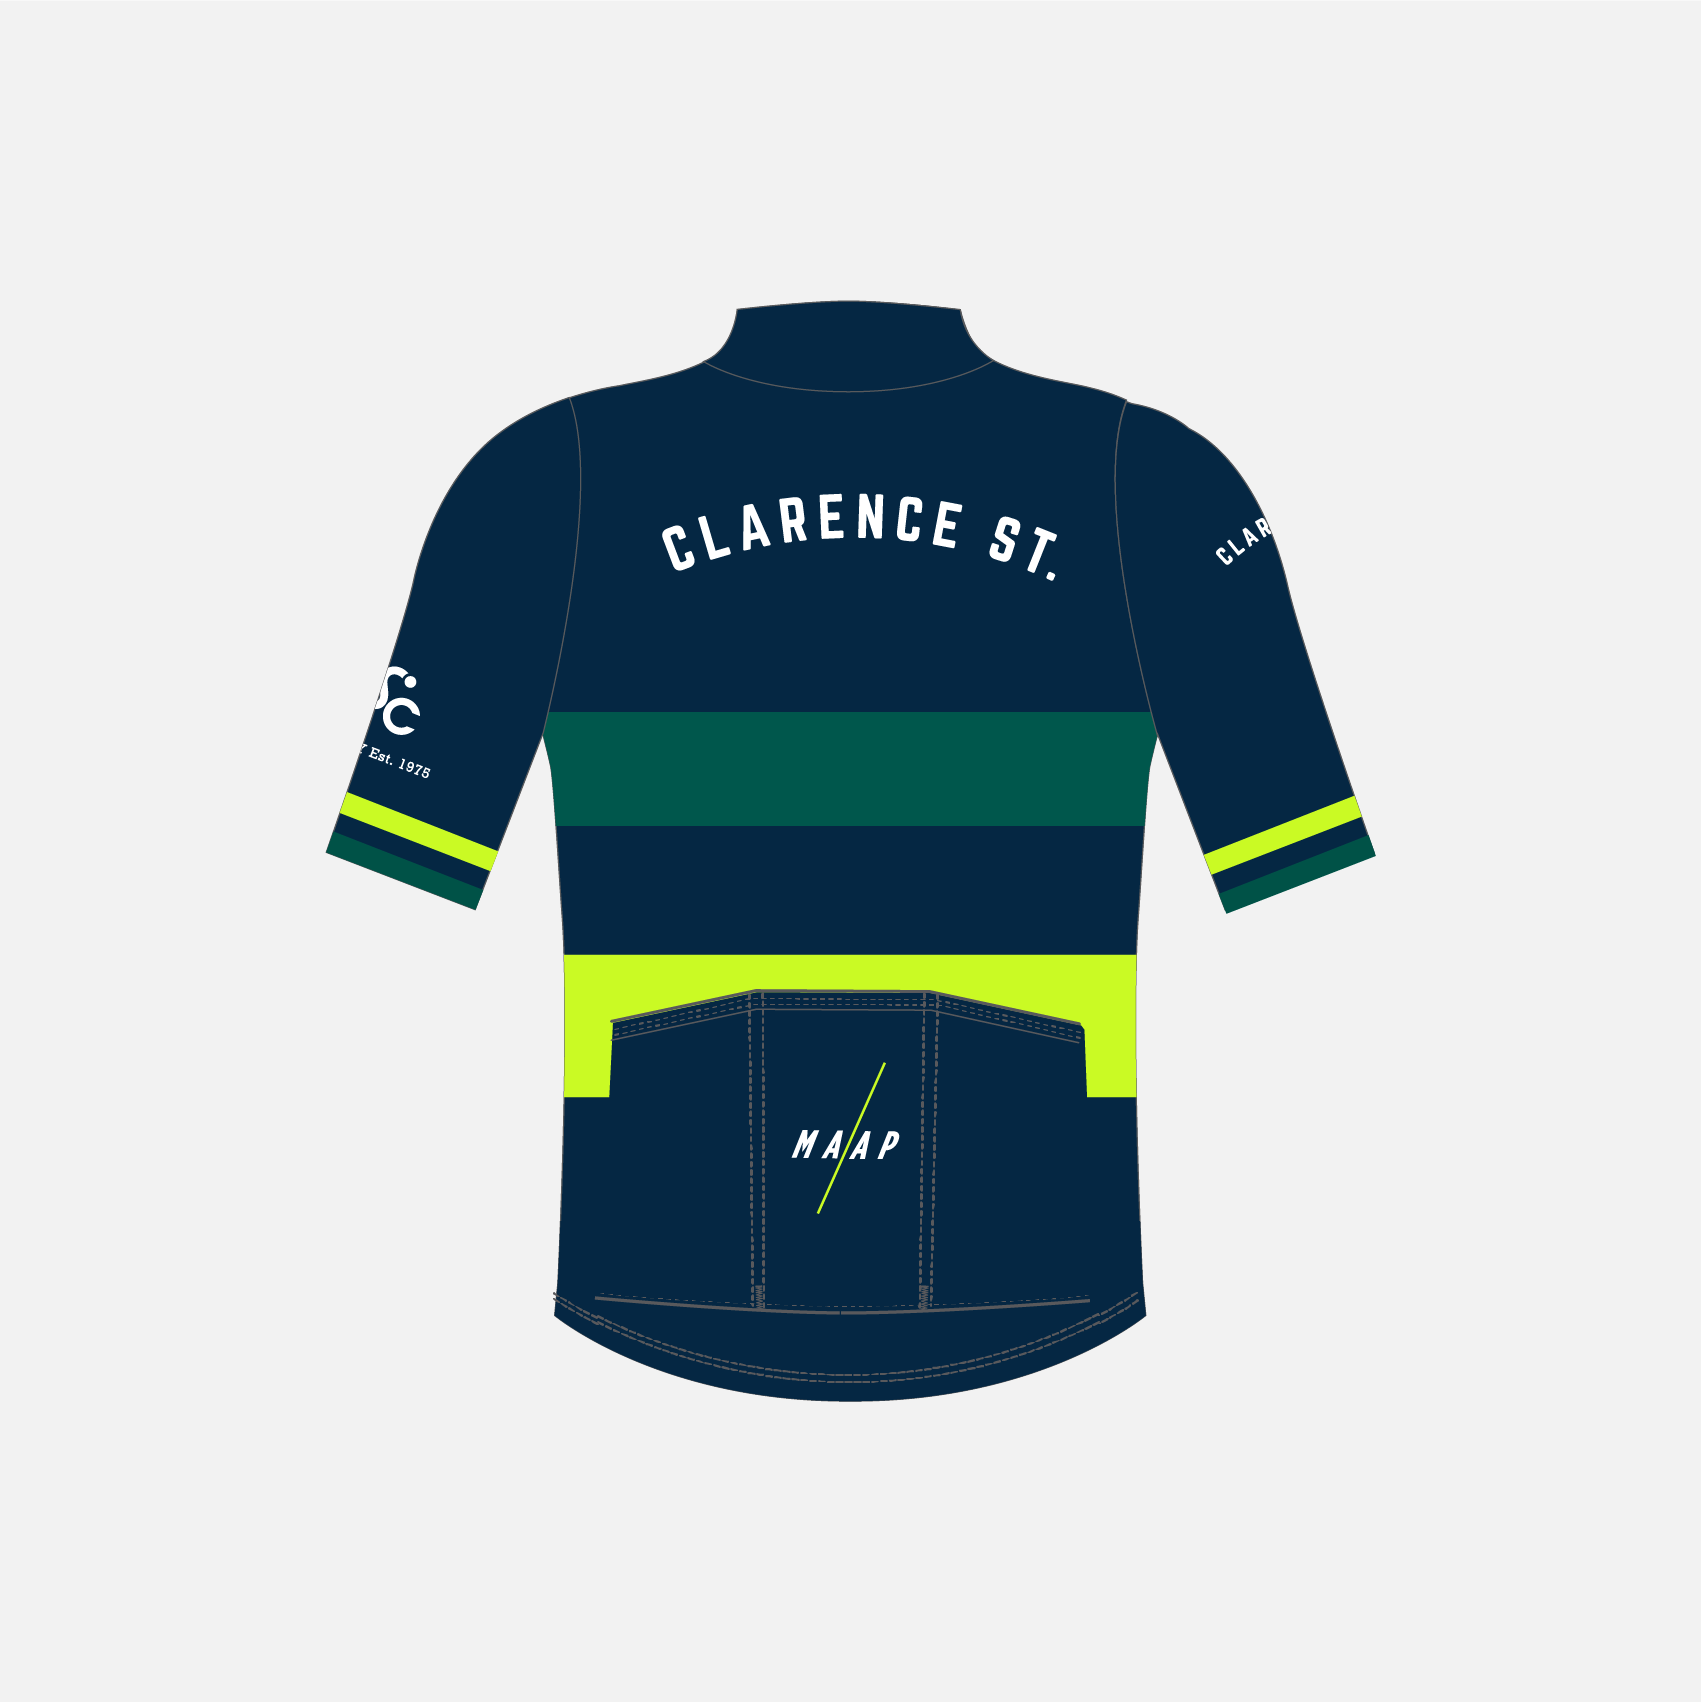 MAAP X Clarence St Cyclery Jersey 1.0